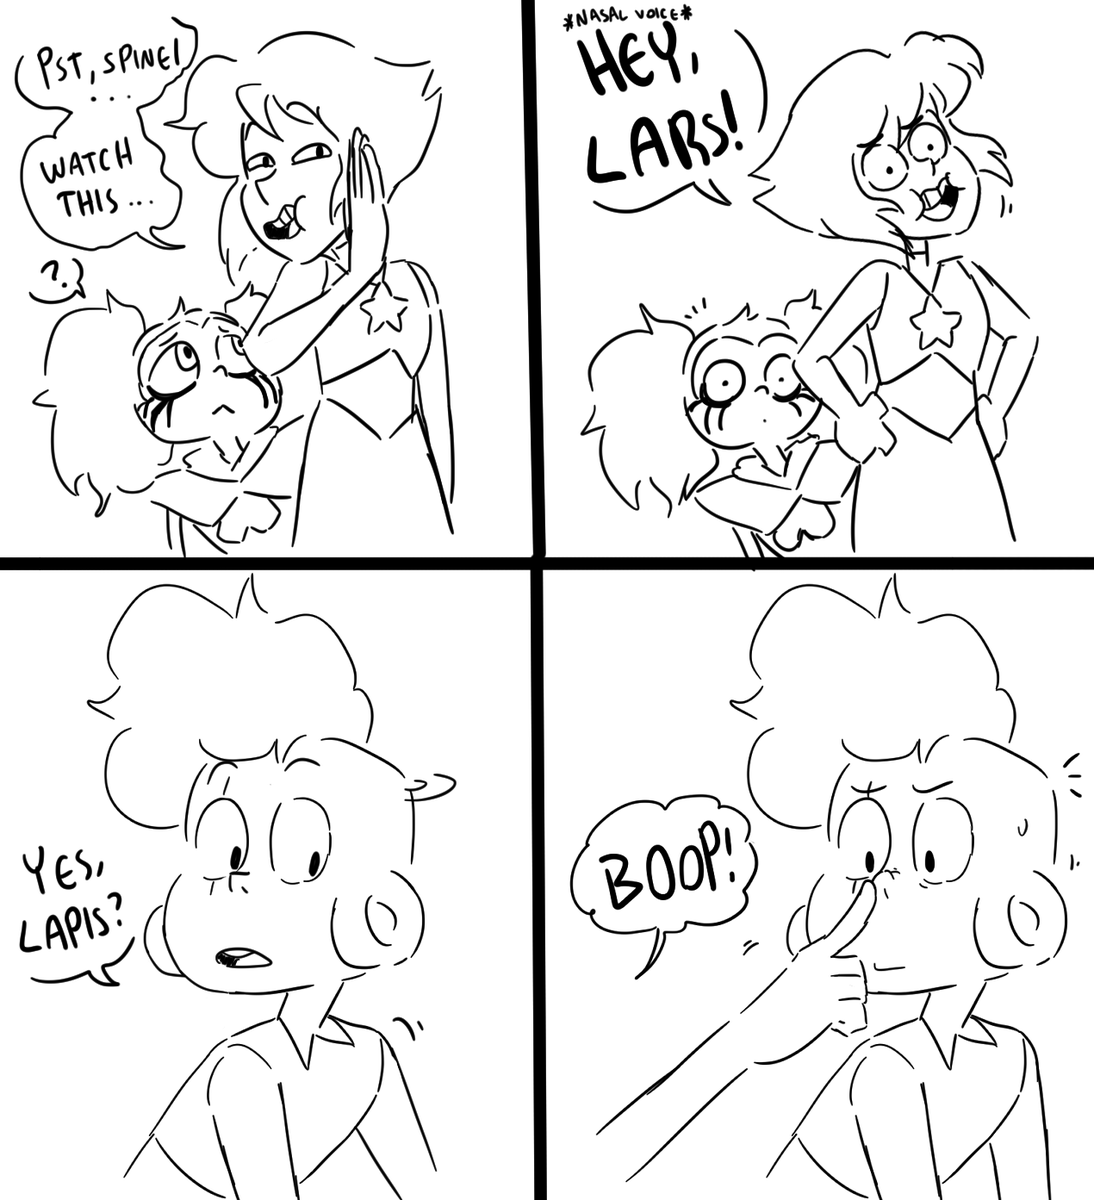 Lapis tries to cheer Spinel up in the most feral way possible 